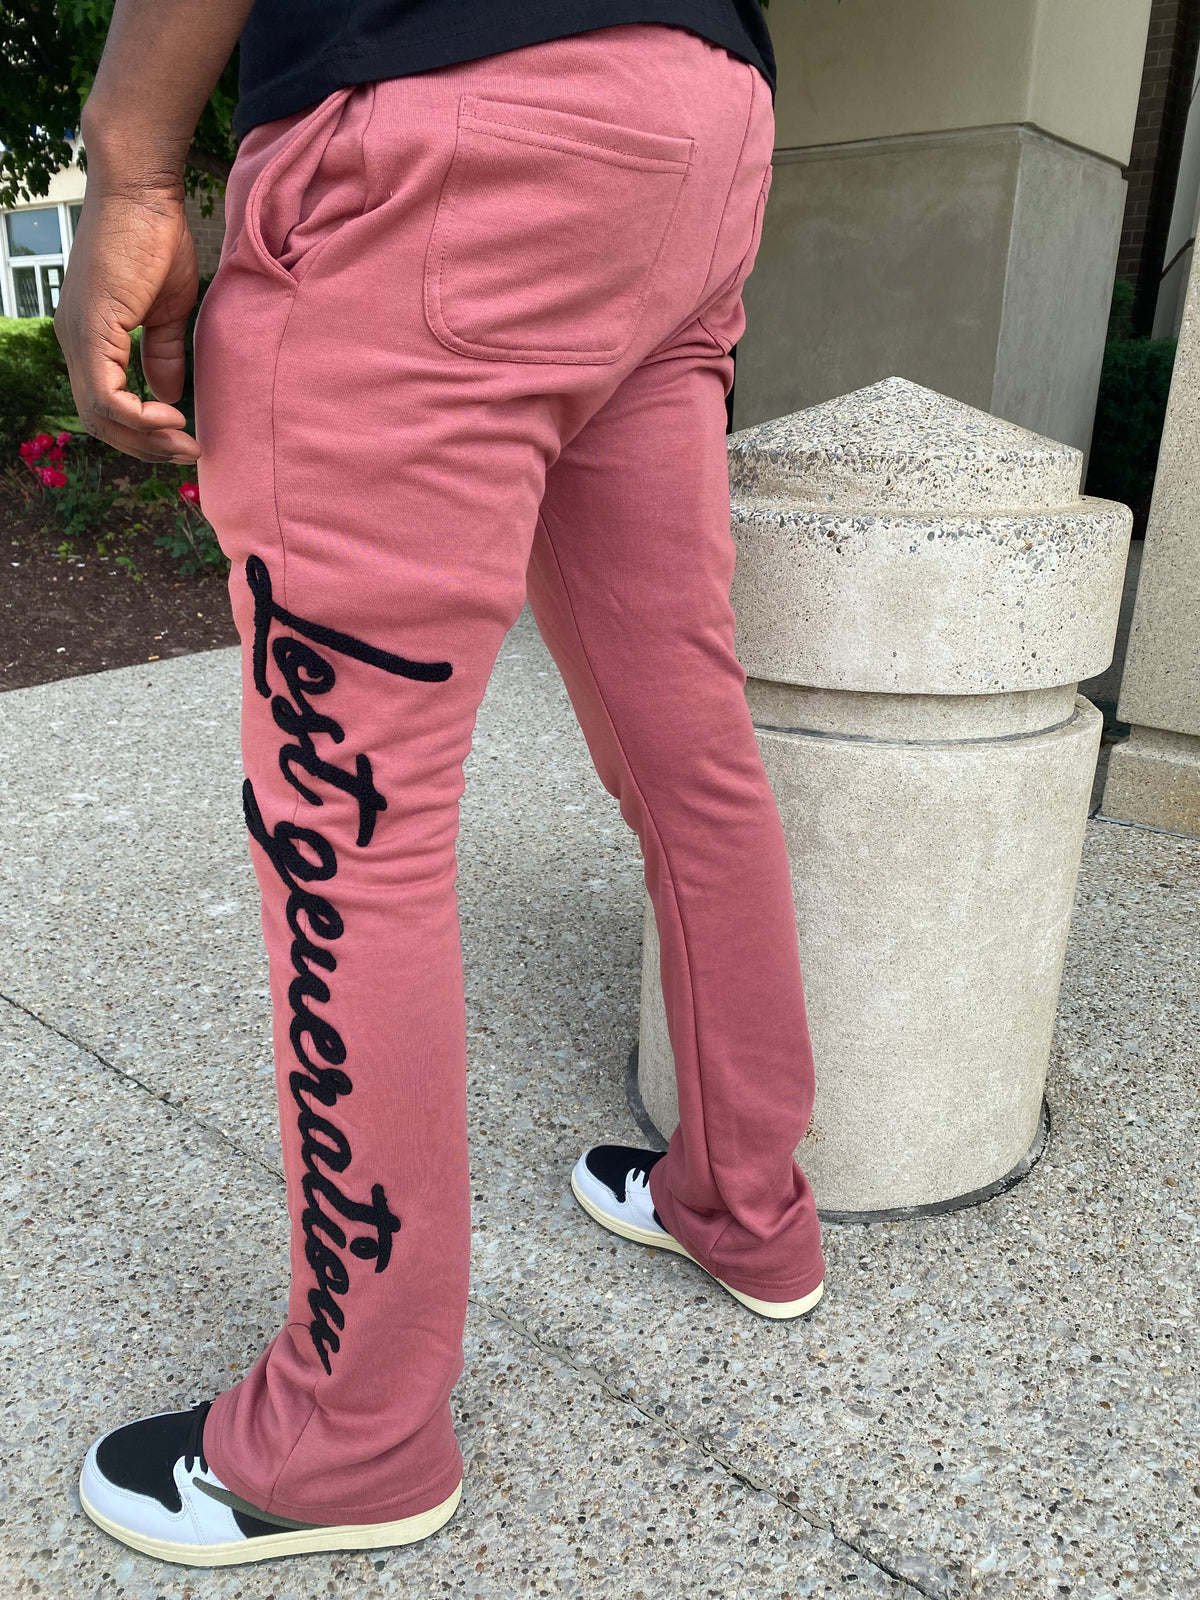 Lost Generations 2 Stacked Sweatpants - Black – Todays Man Store